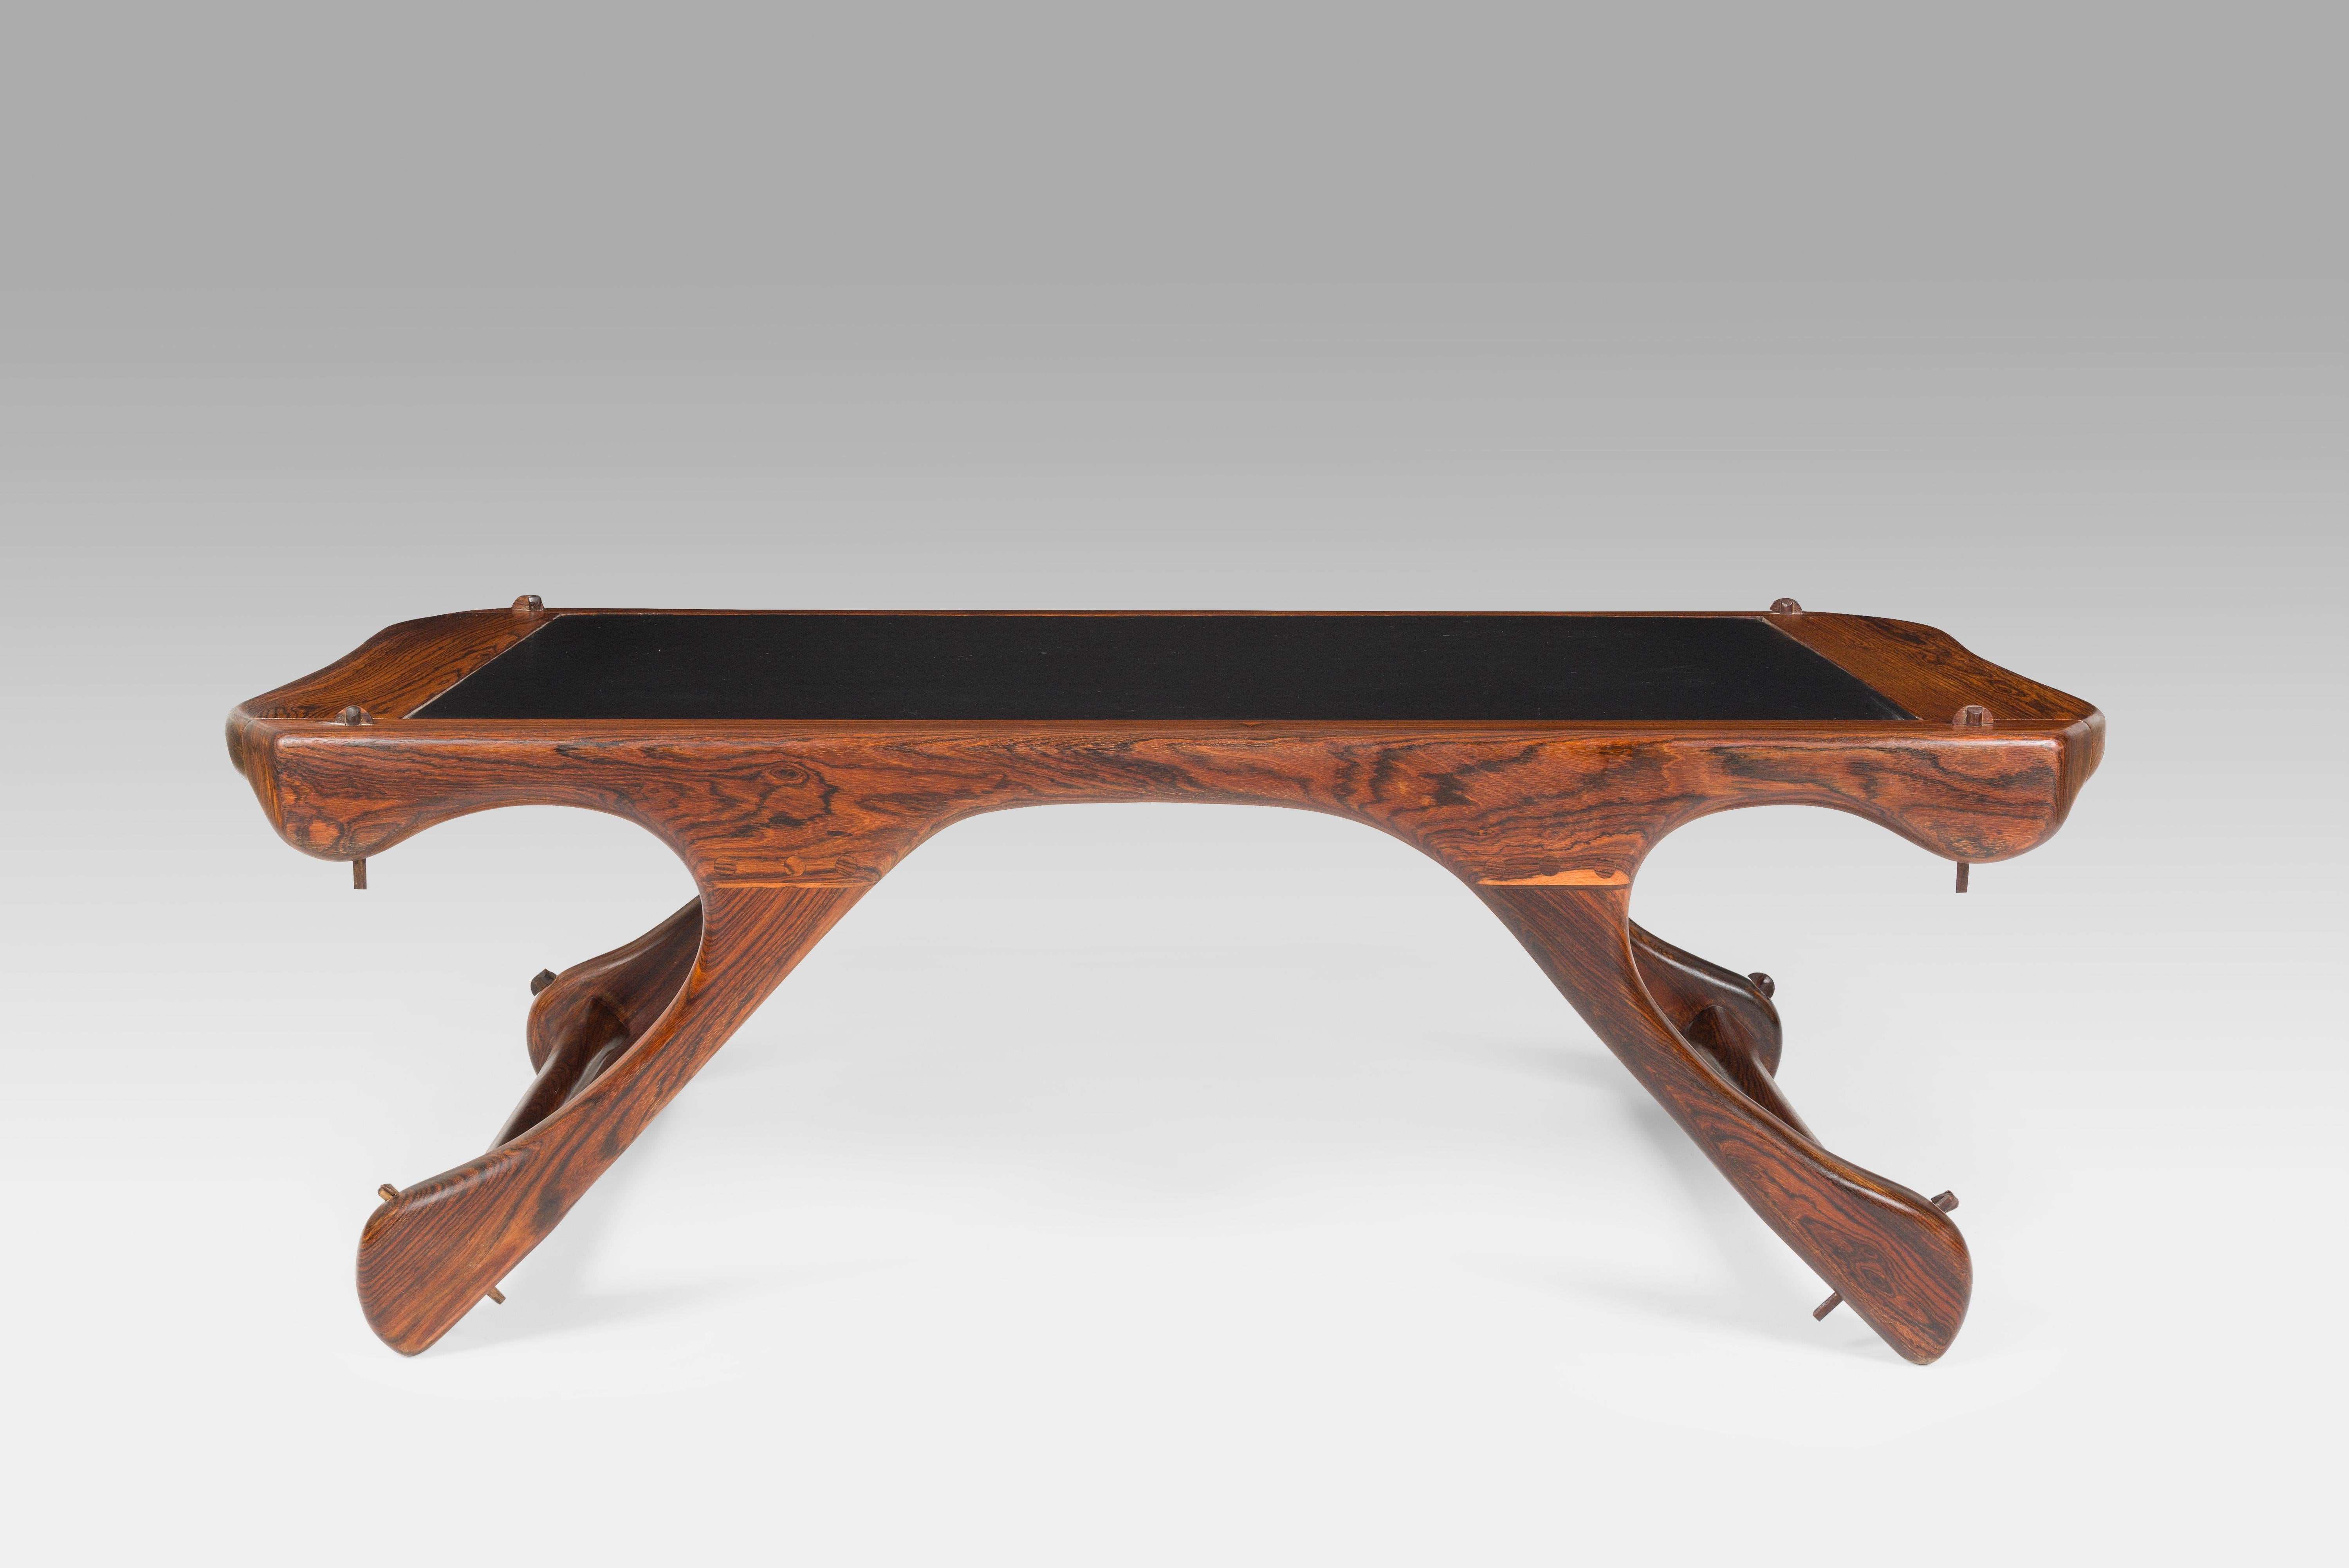 Label: Señal S.A.Hecho en Mexico.

Cocobolo wood and black leather mid-century modern coffee table from the sixties. The leather has a beautiful sensual feel and is in excellent condition. The cocobolo gives it a warm yet unique look with its